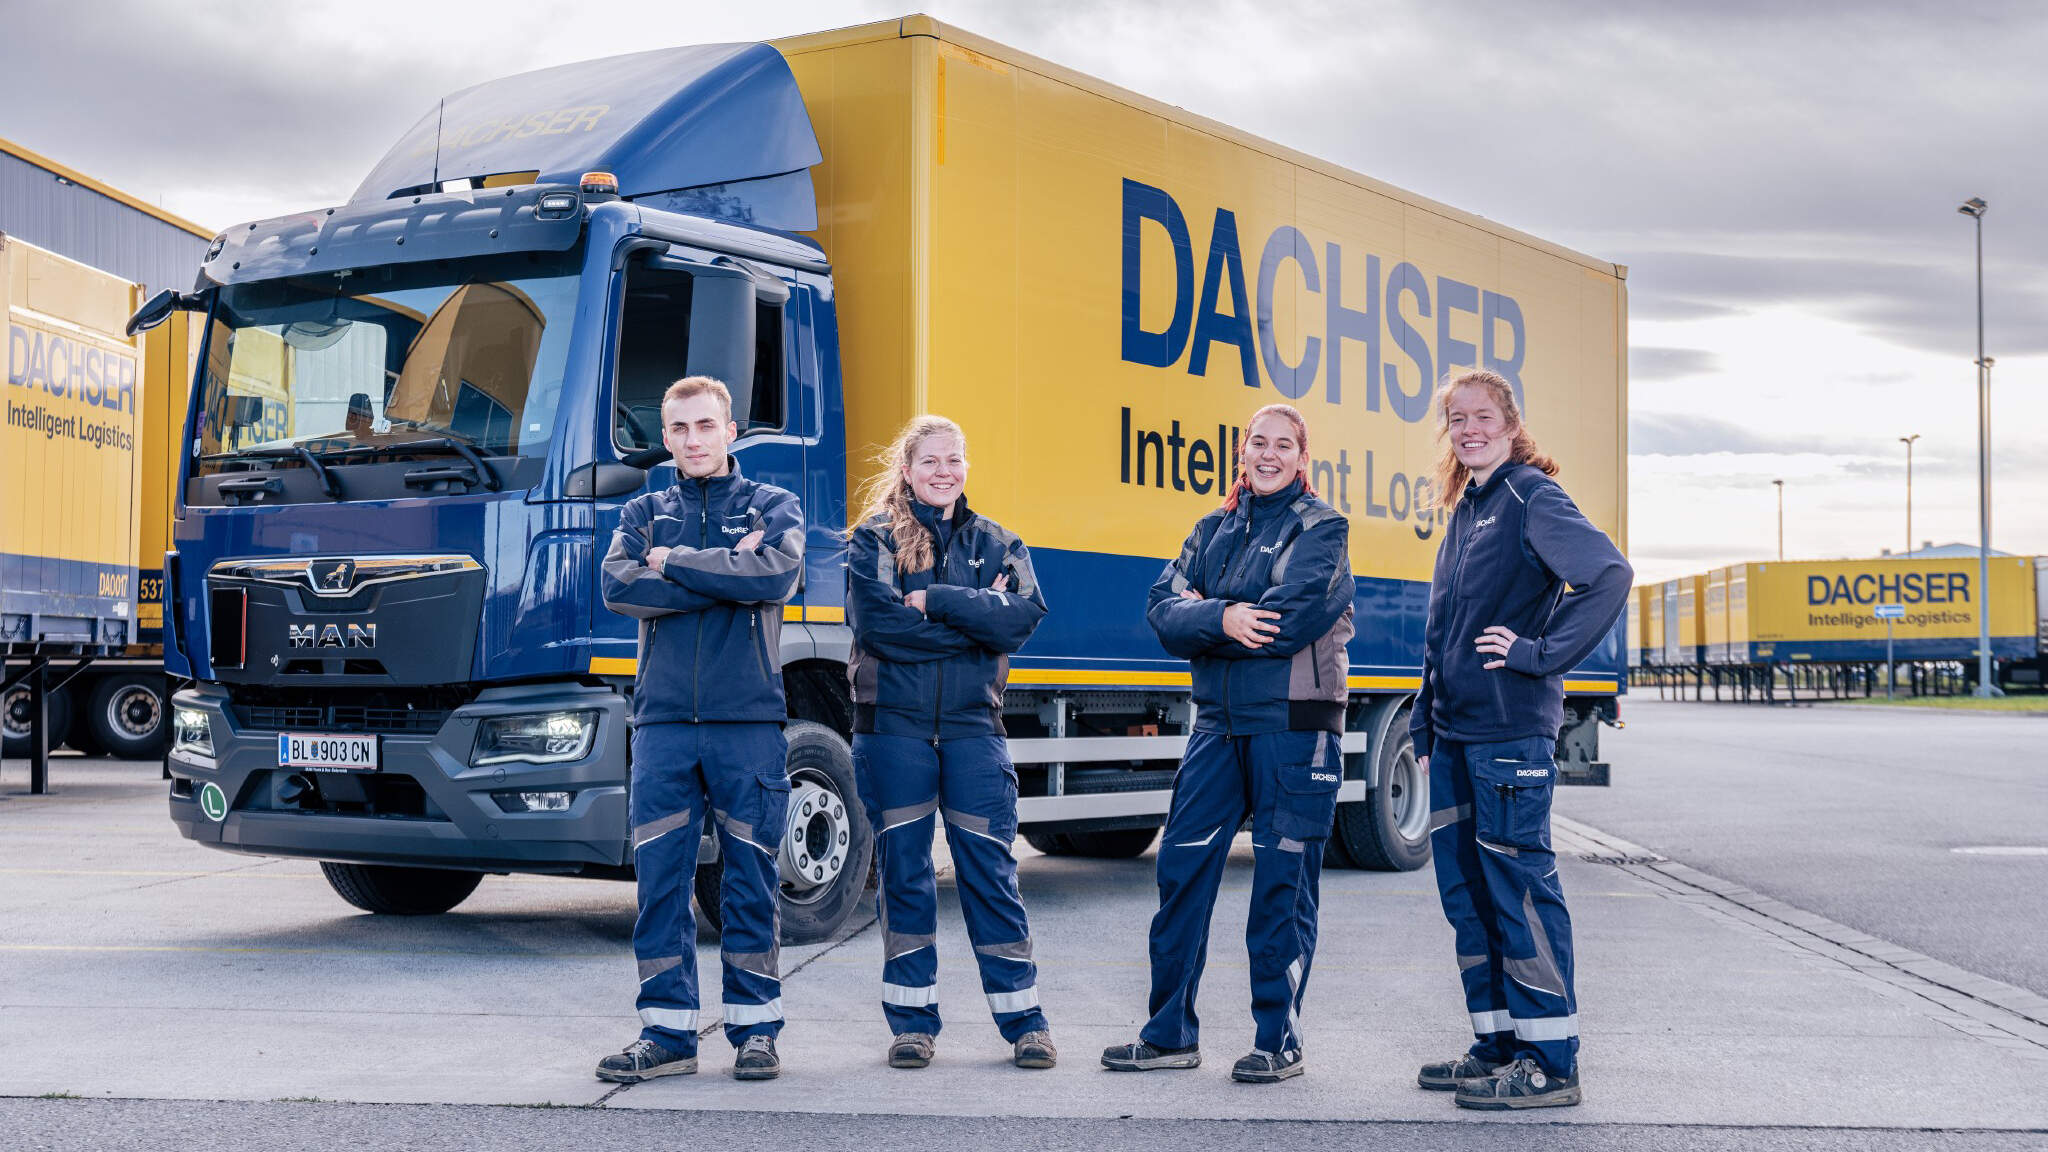 With DACHSER Service und Ausbildungs GmbH, the logistics service provider launched a sustainable qualification offensive ten years ago.